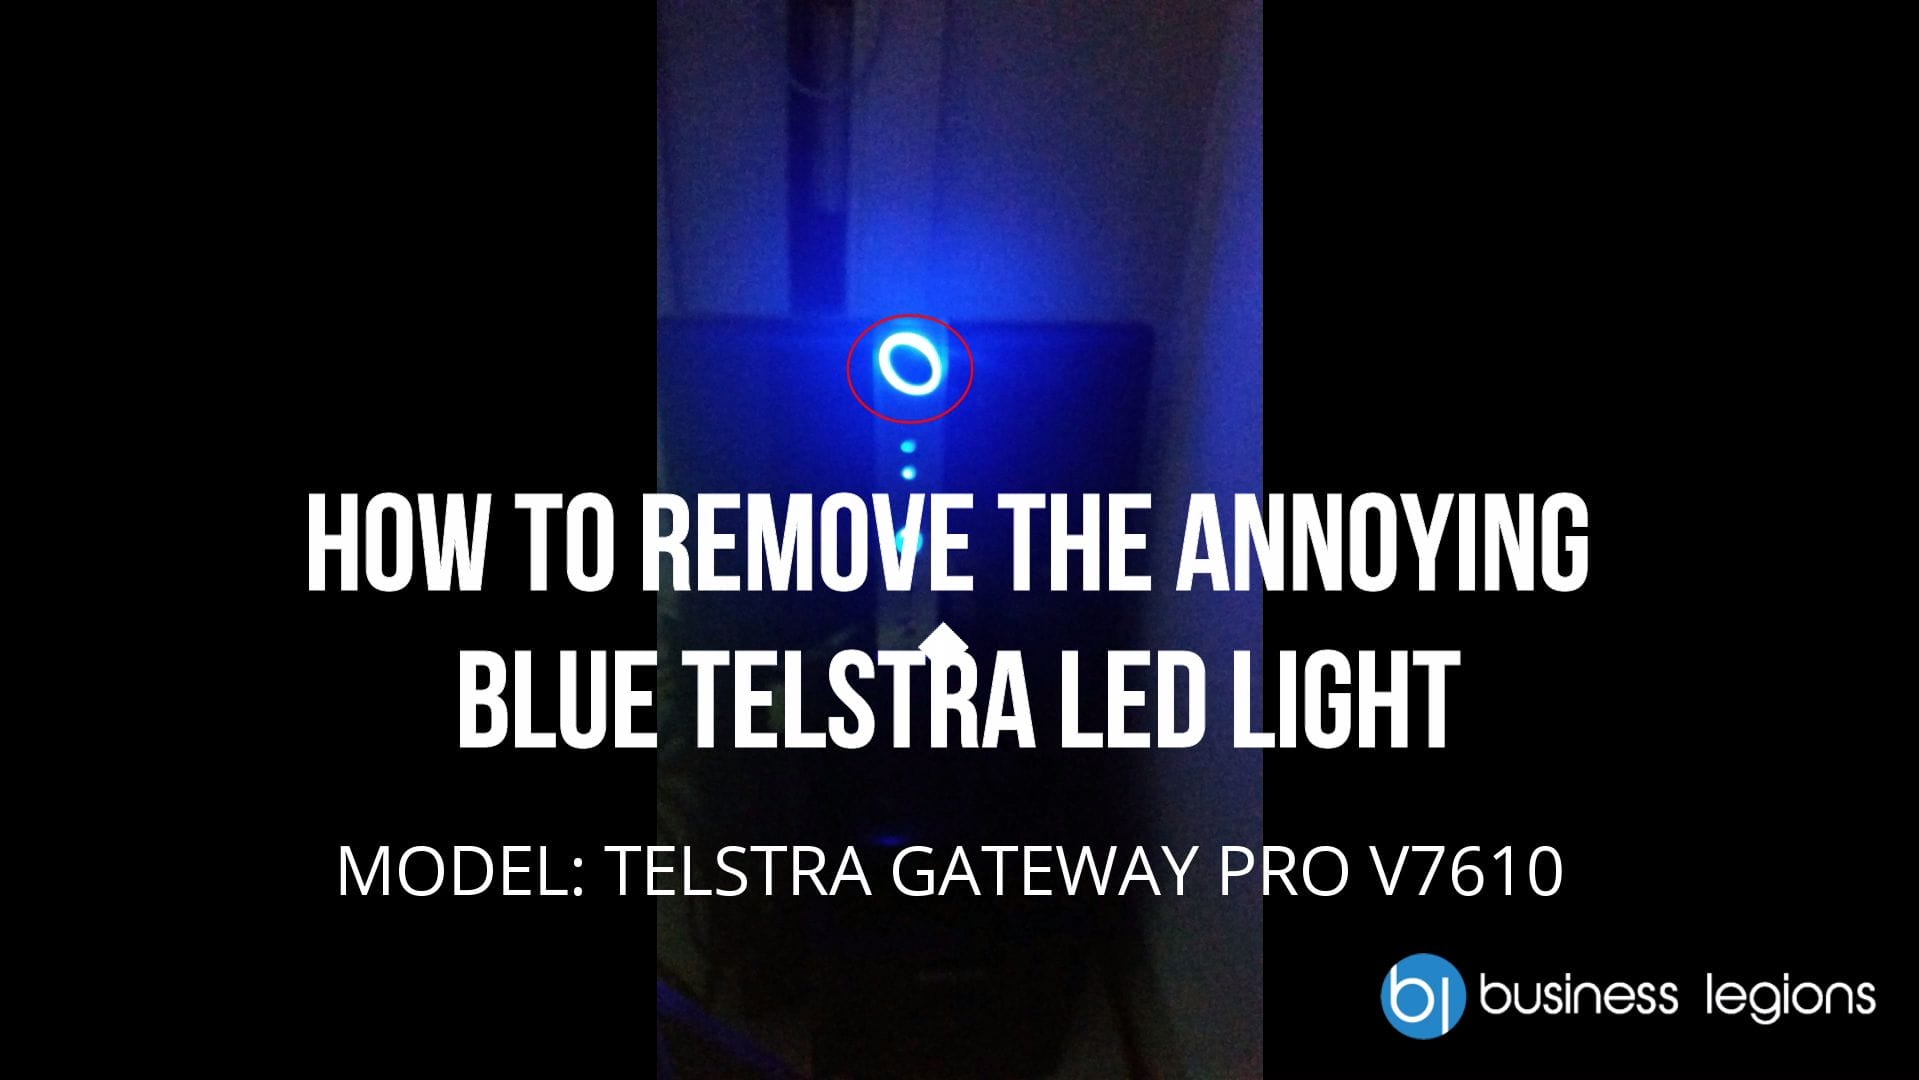 How to remove the annoying blue Telstra logo light from Gateway Pro v7610